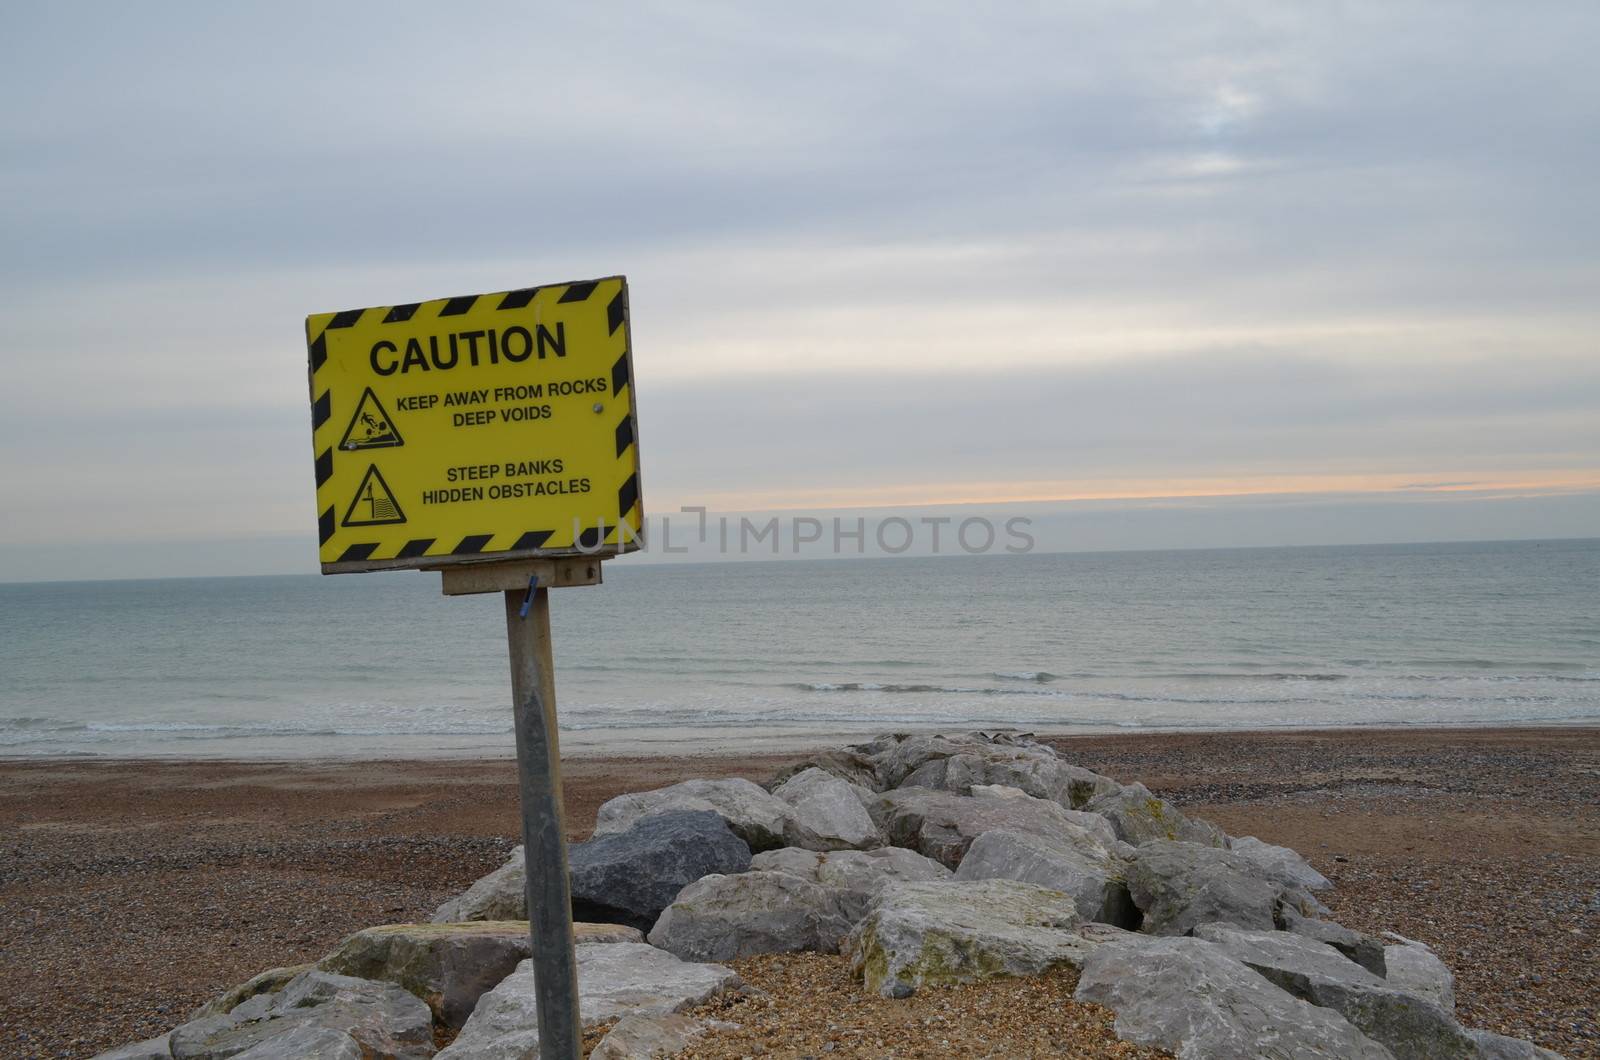 A yellow information sign warning of rocks and hidden objects along the seashore.Image taken along Worthing beach,Sussex,England.